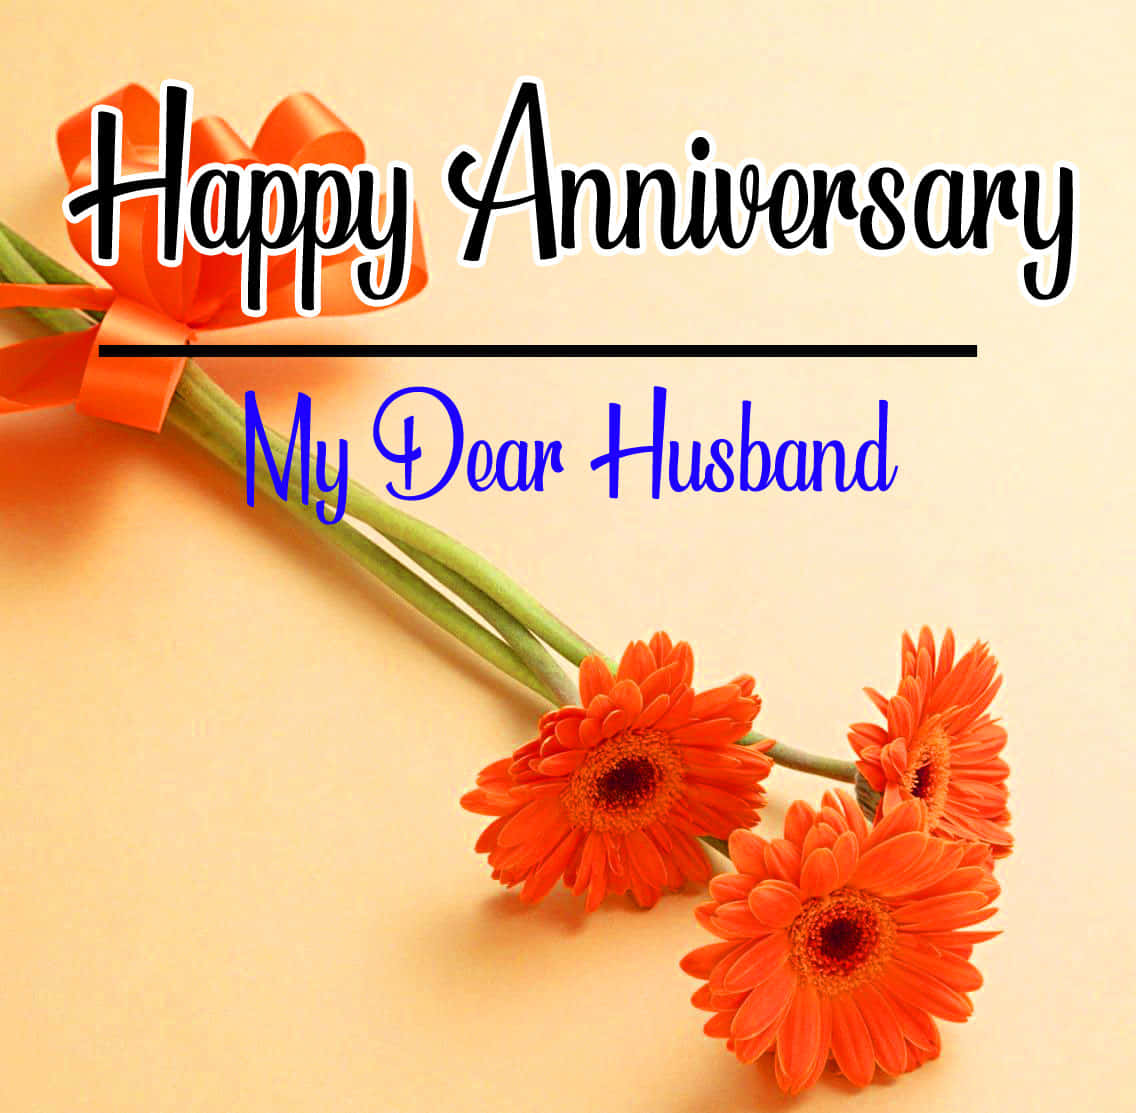 Anniversary Message To The Husband Wallpaper